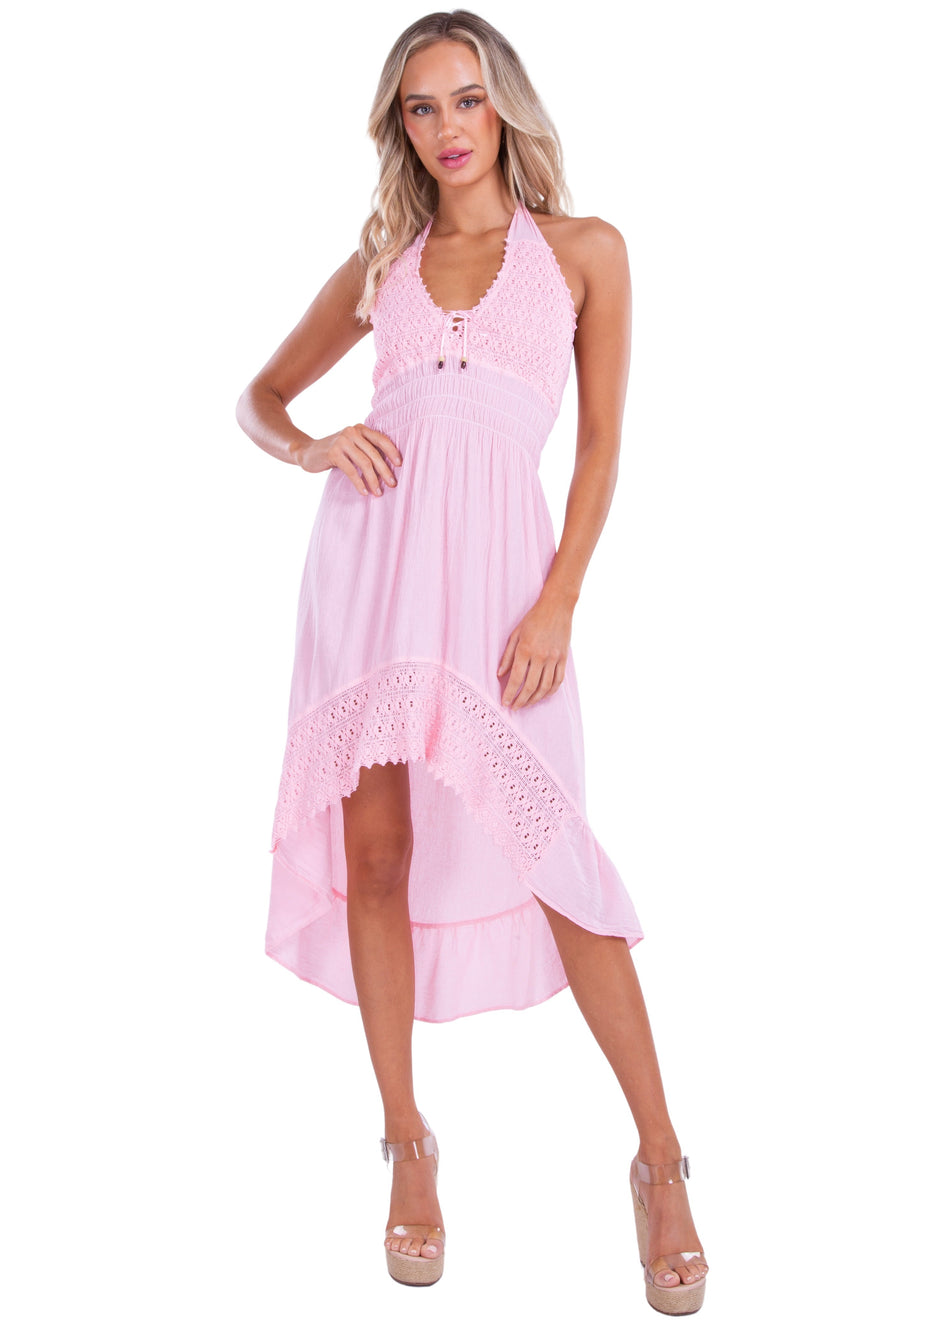 NW1169 - Baby Pink Cotton Dress